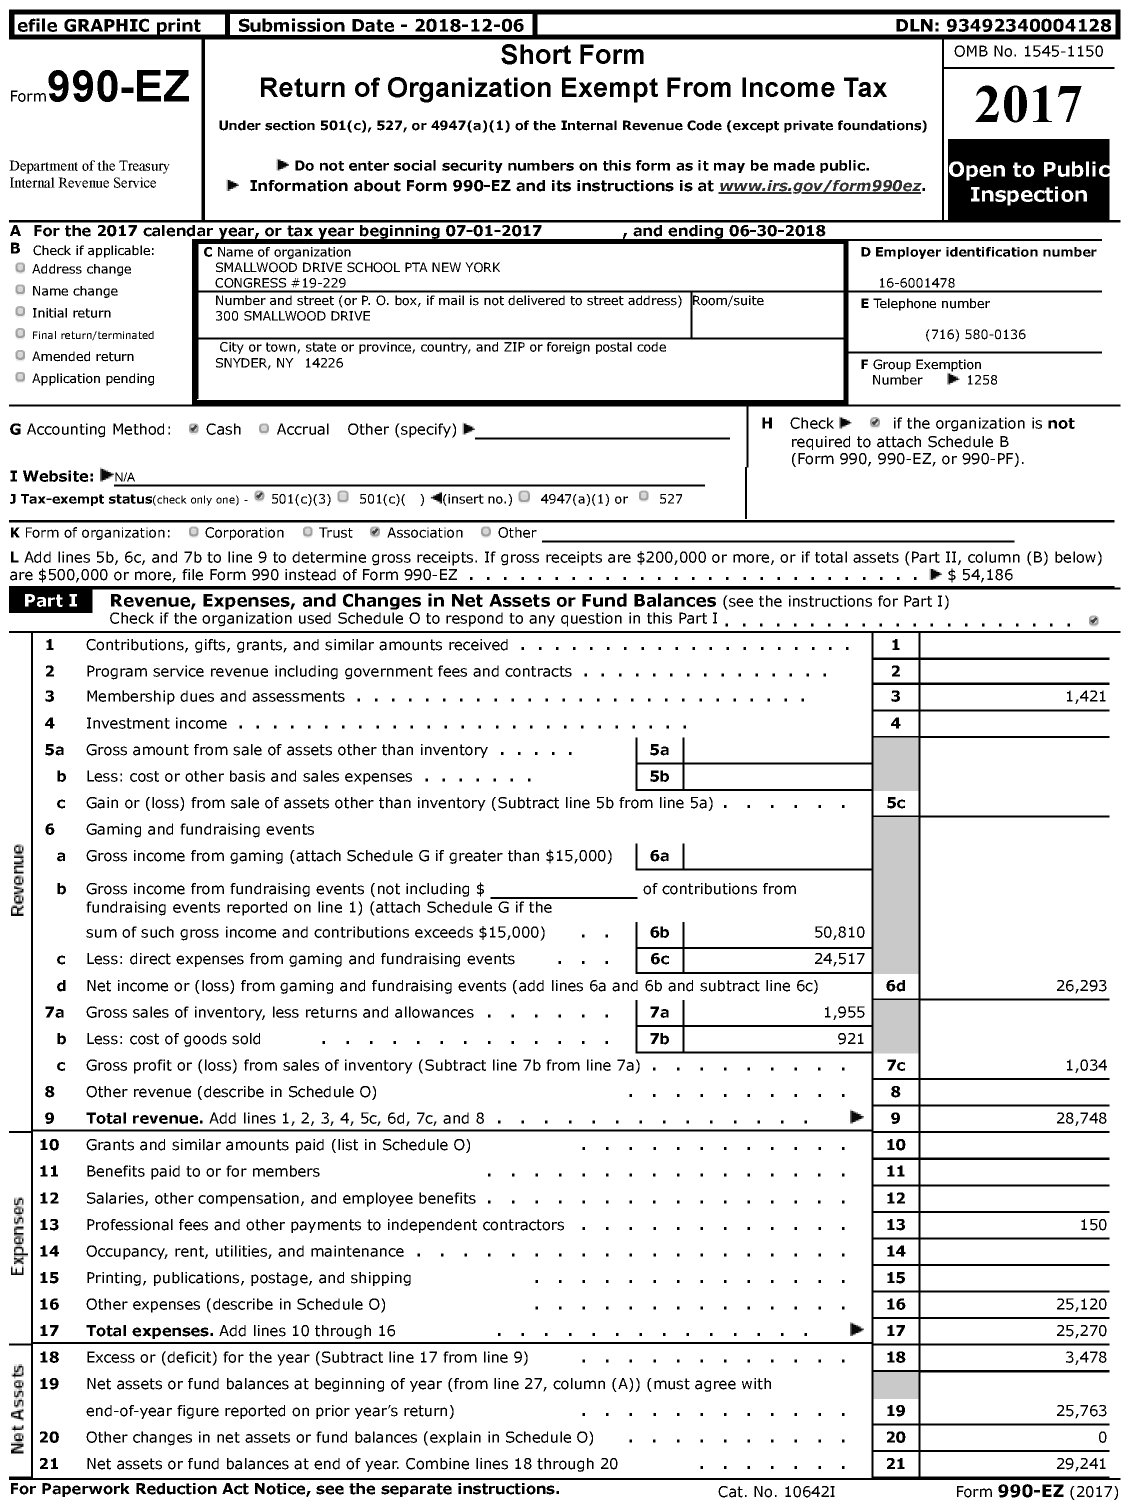 Image of first page of 2017 Form 990EZ for NEW YORK State PTA - 19-229 Smallwood Drive School PTA